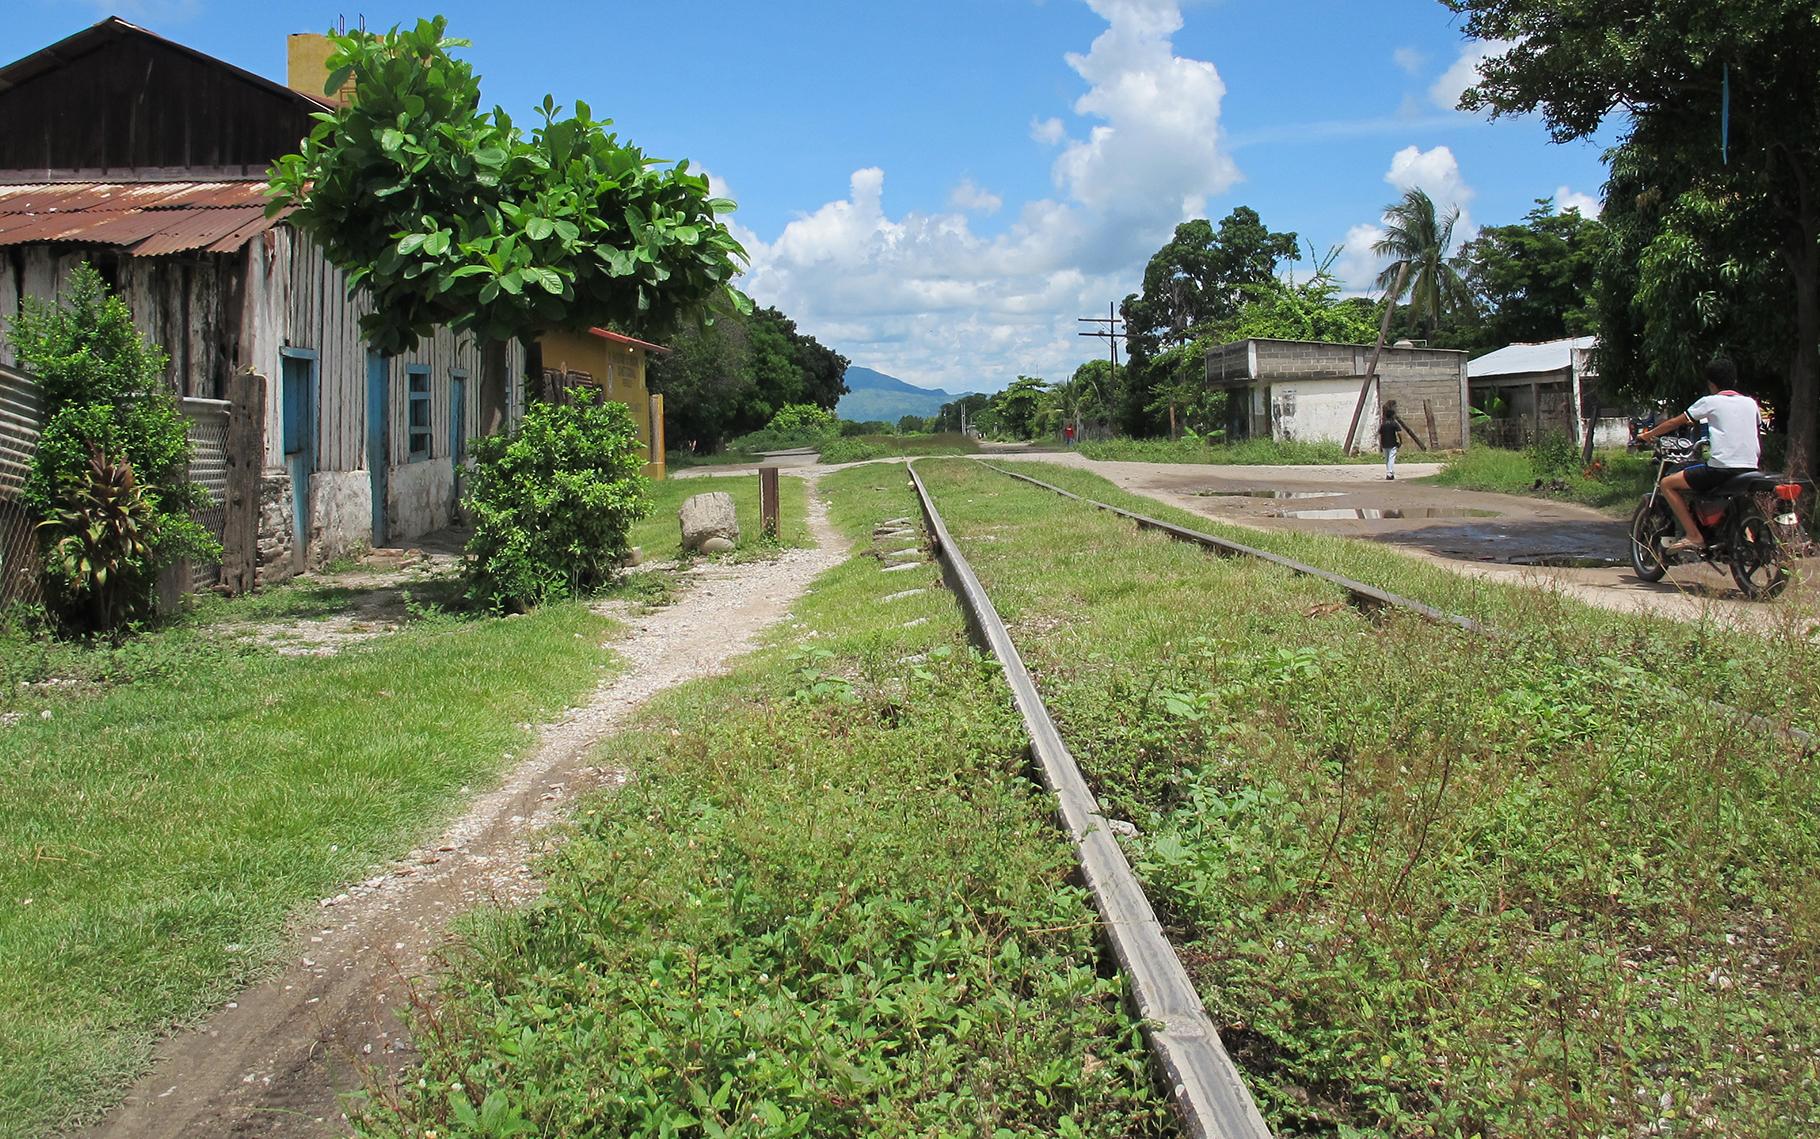 Railroad tracks in Chahuites. Some migrants spend weeks walking along train tracks in southern Mexico where they face high risks of robbery, kidnapping and sexual assault.